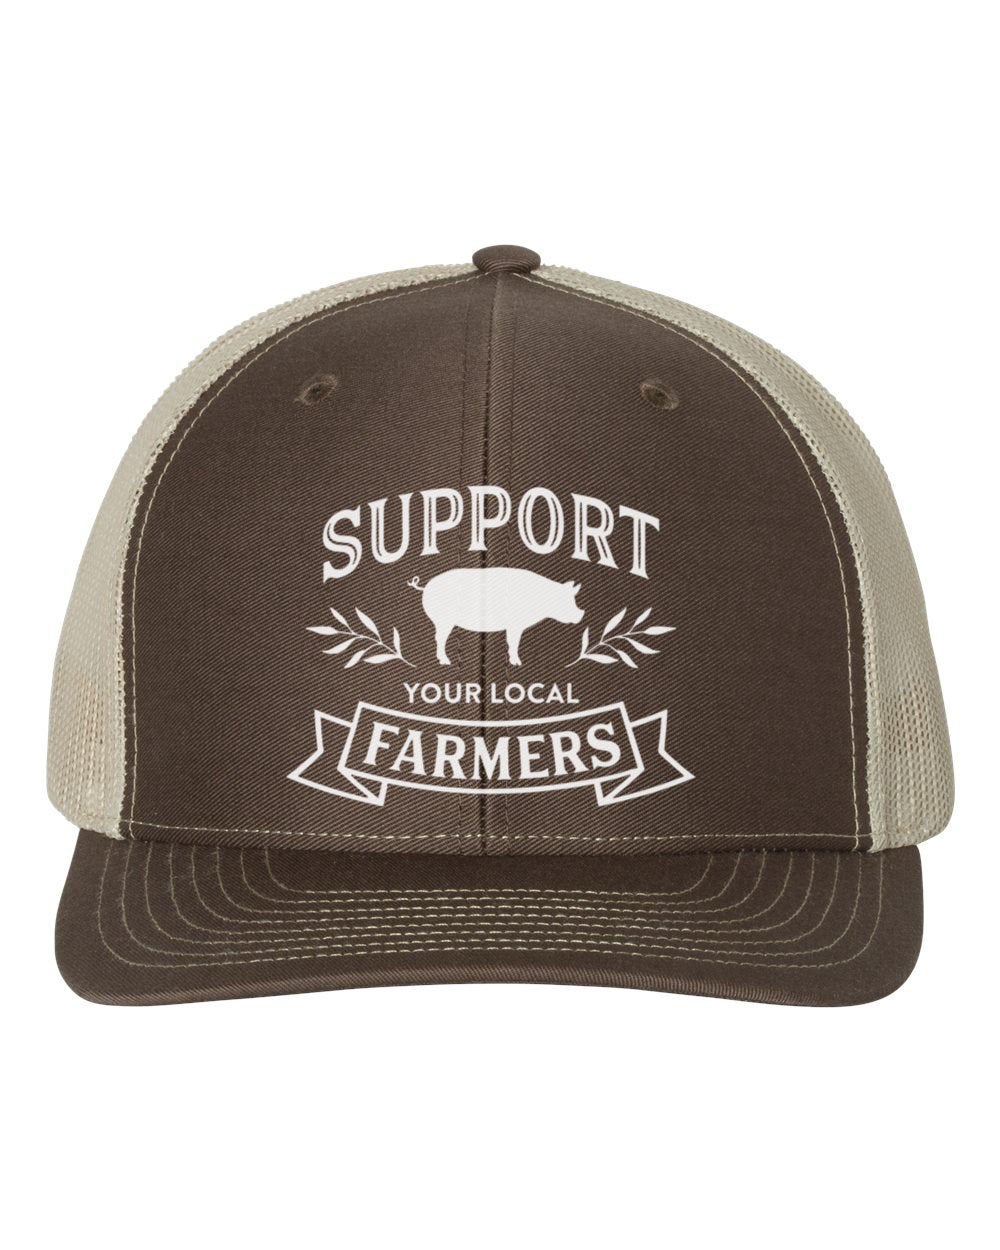 Support Your Local Farmers Hat (White Text) Brown/Khaki